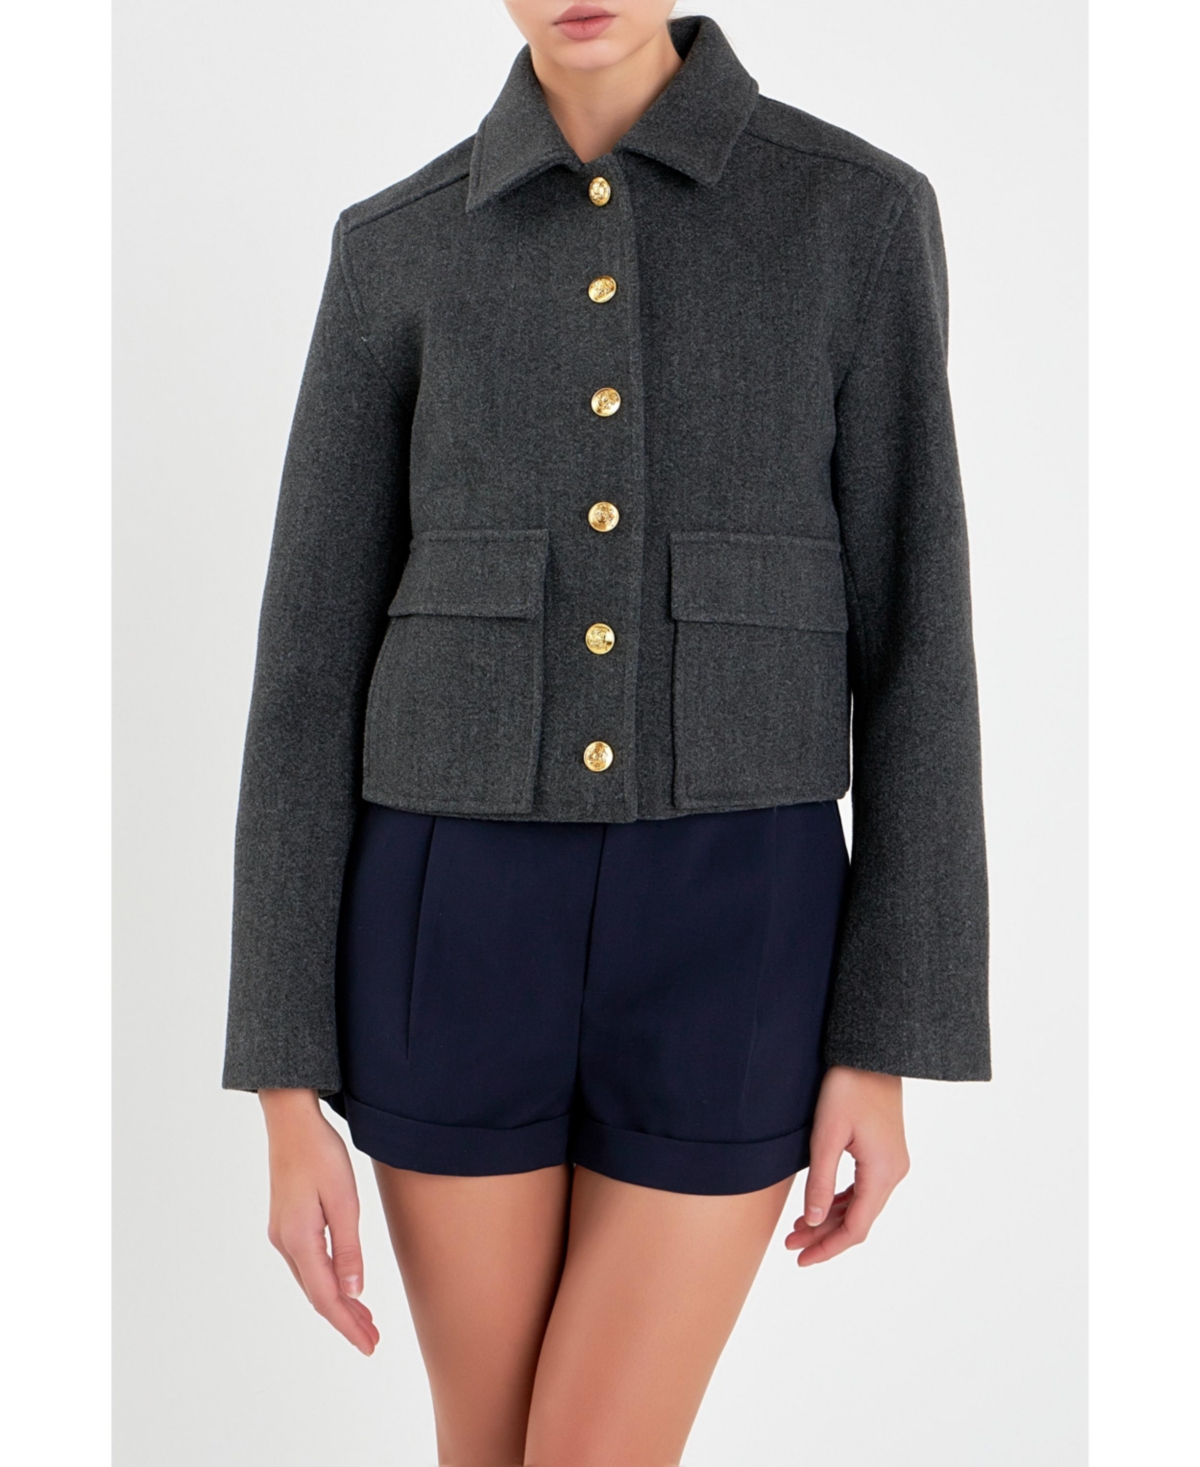 ENGLISH FACTORY WOMEN'S GOLD BUTTON CROPPED JACKET